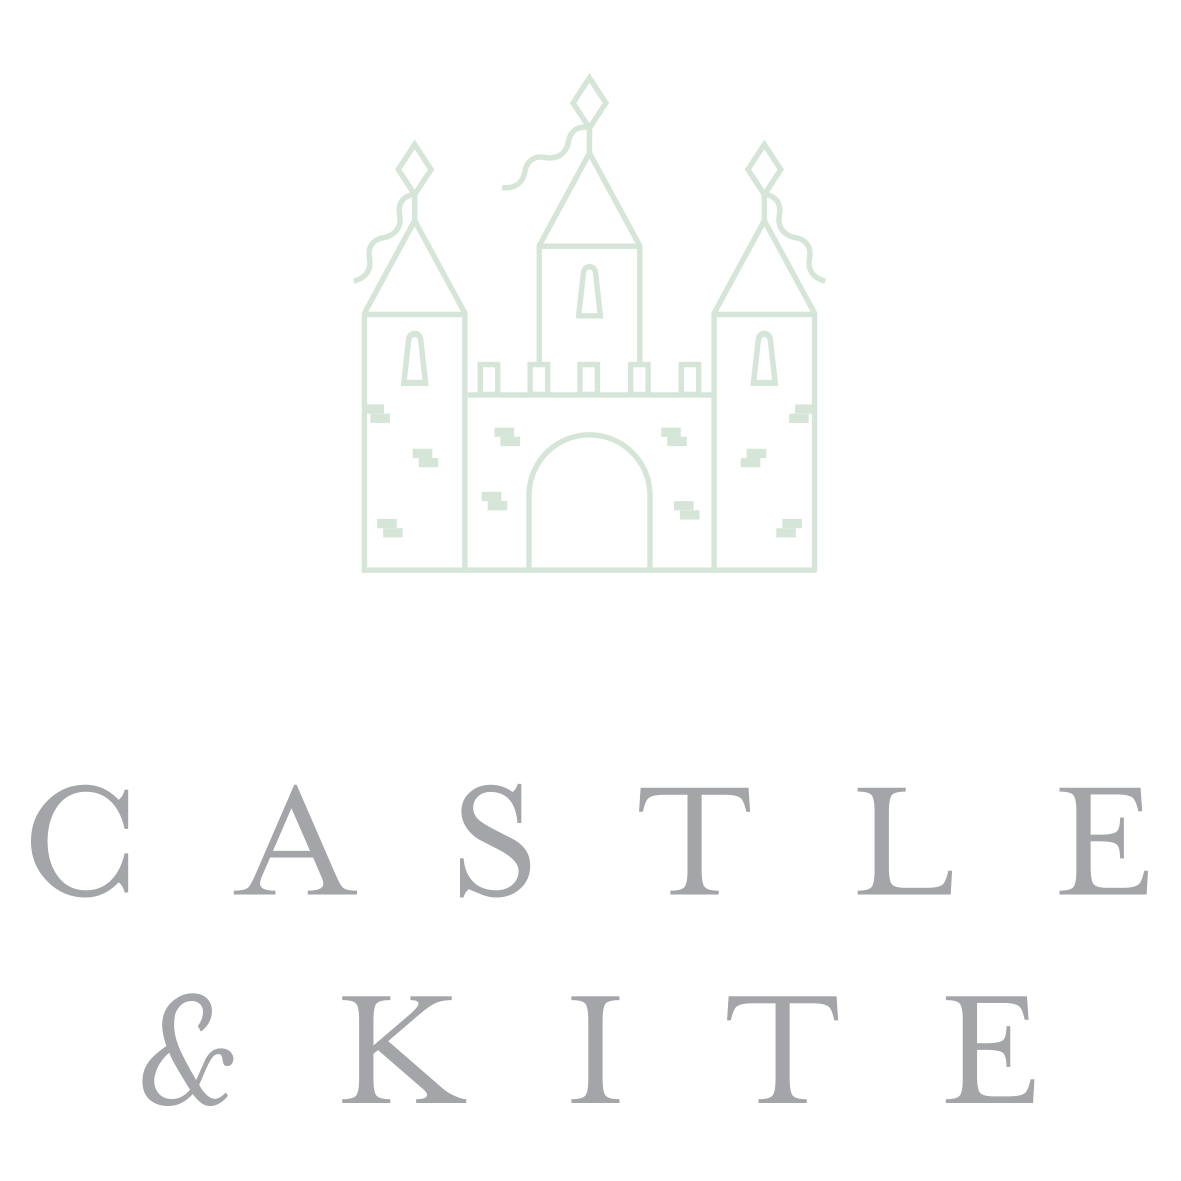 Welcome to Castle & Kite